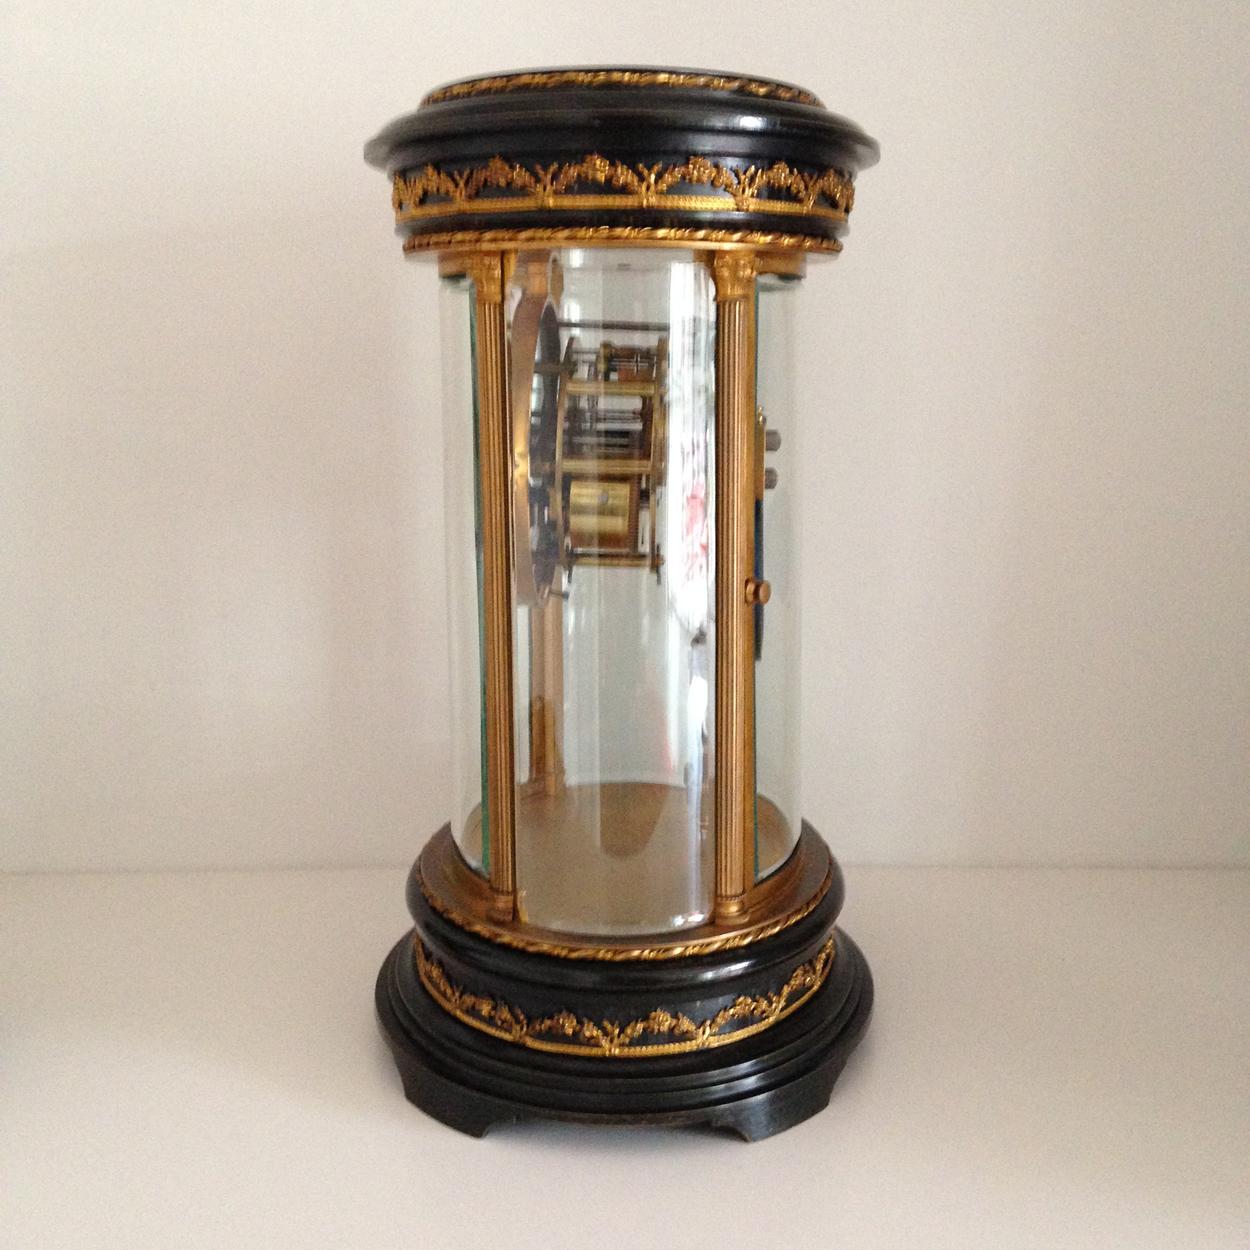 Beveled French Four Glass Library Clock Garniture, circa 1860 For Sale